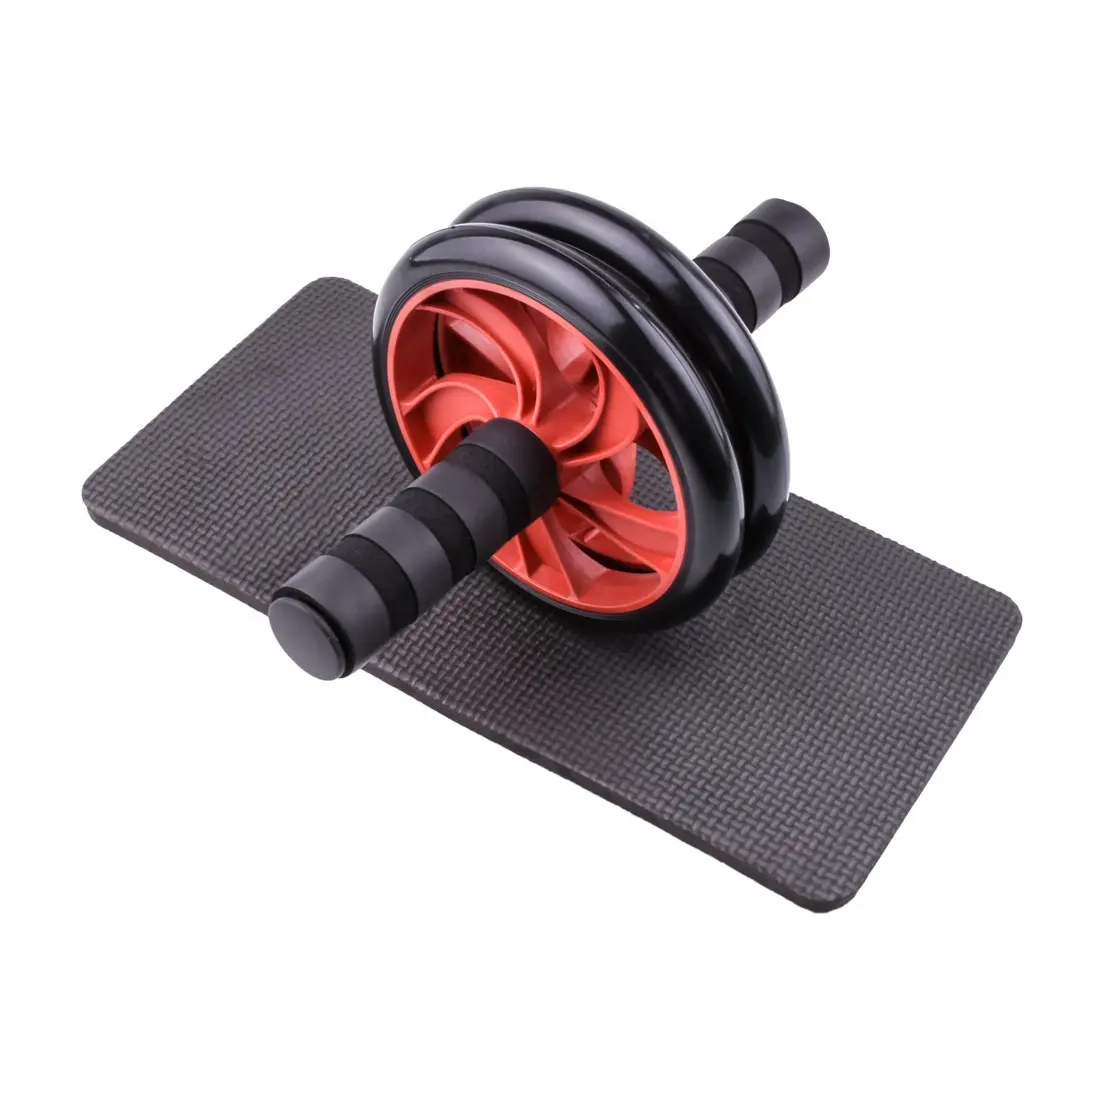 Home Gym Workout Equipment Mute Roller AB Wheel Sliding Push Up Bar For Abdominal Exercise